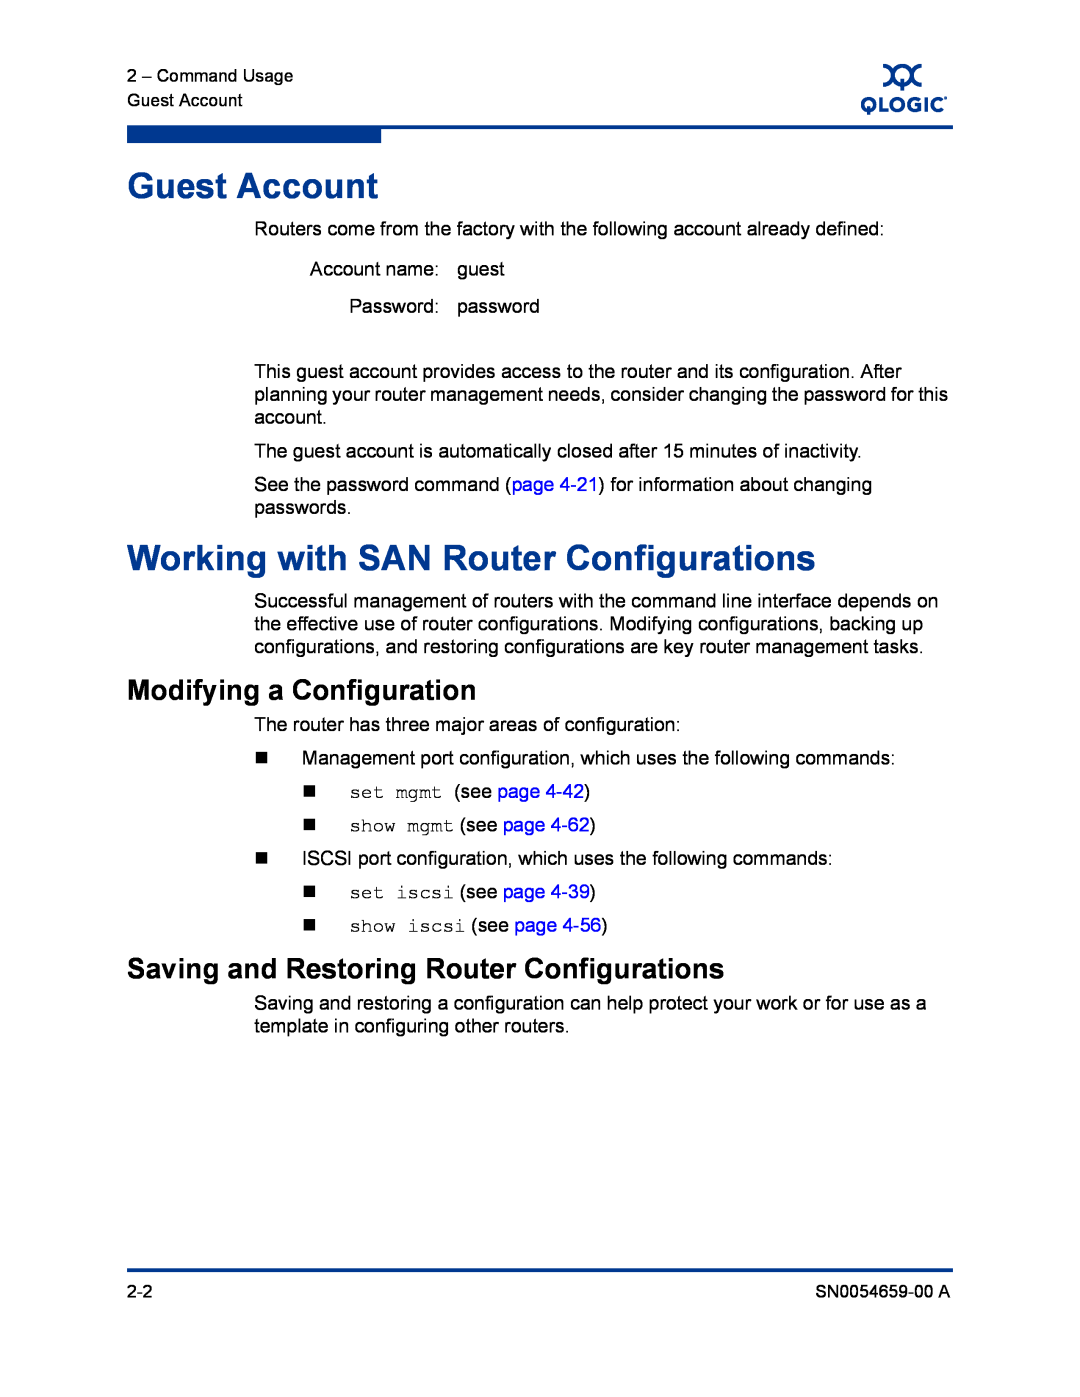 Q-Logic ISR6142 manual Guest Account, Working with SAN Router Configurations, Modifying a Configuration 